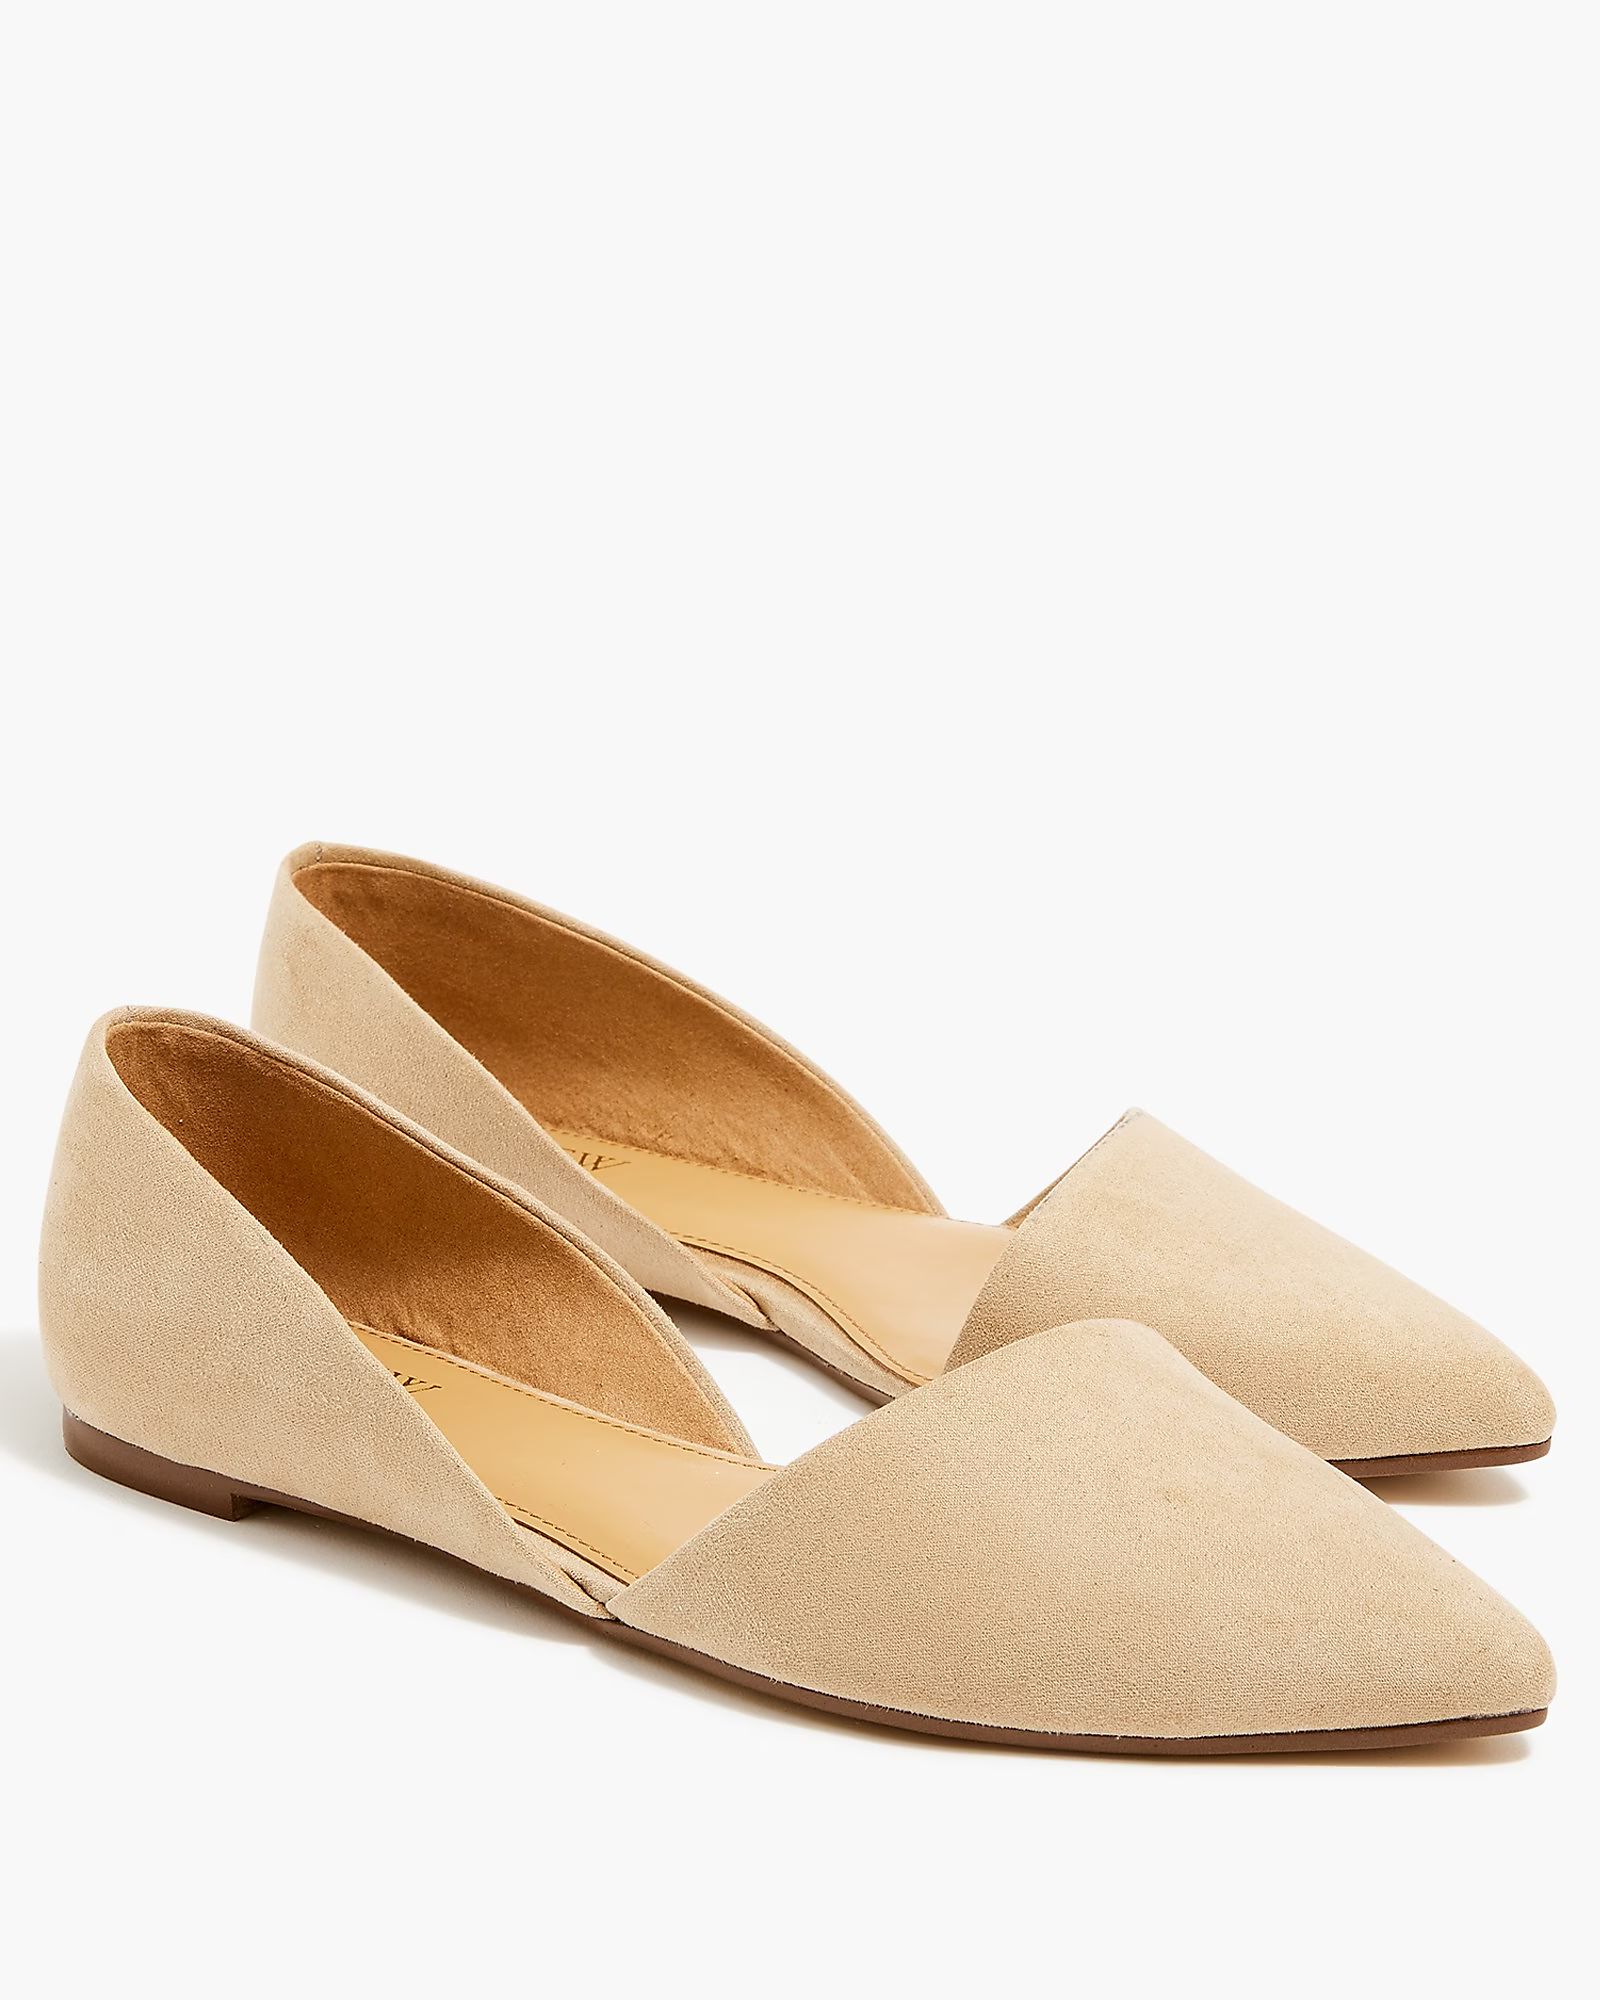 Zoe sueded d'Orsay flats | J.Crew Factory